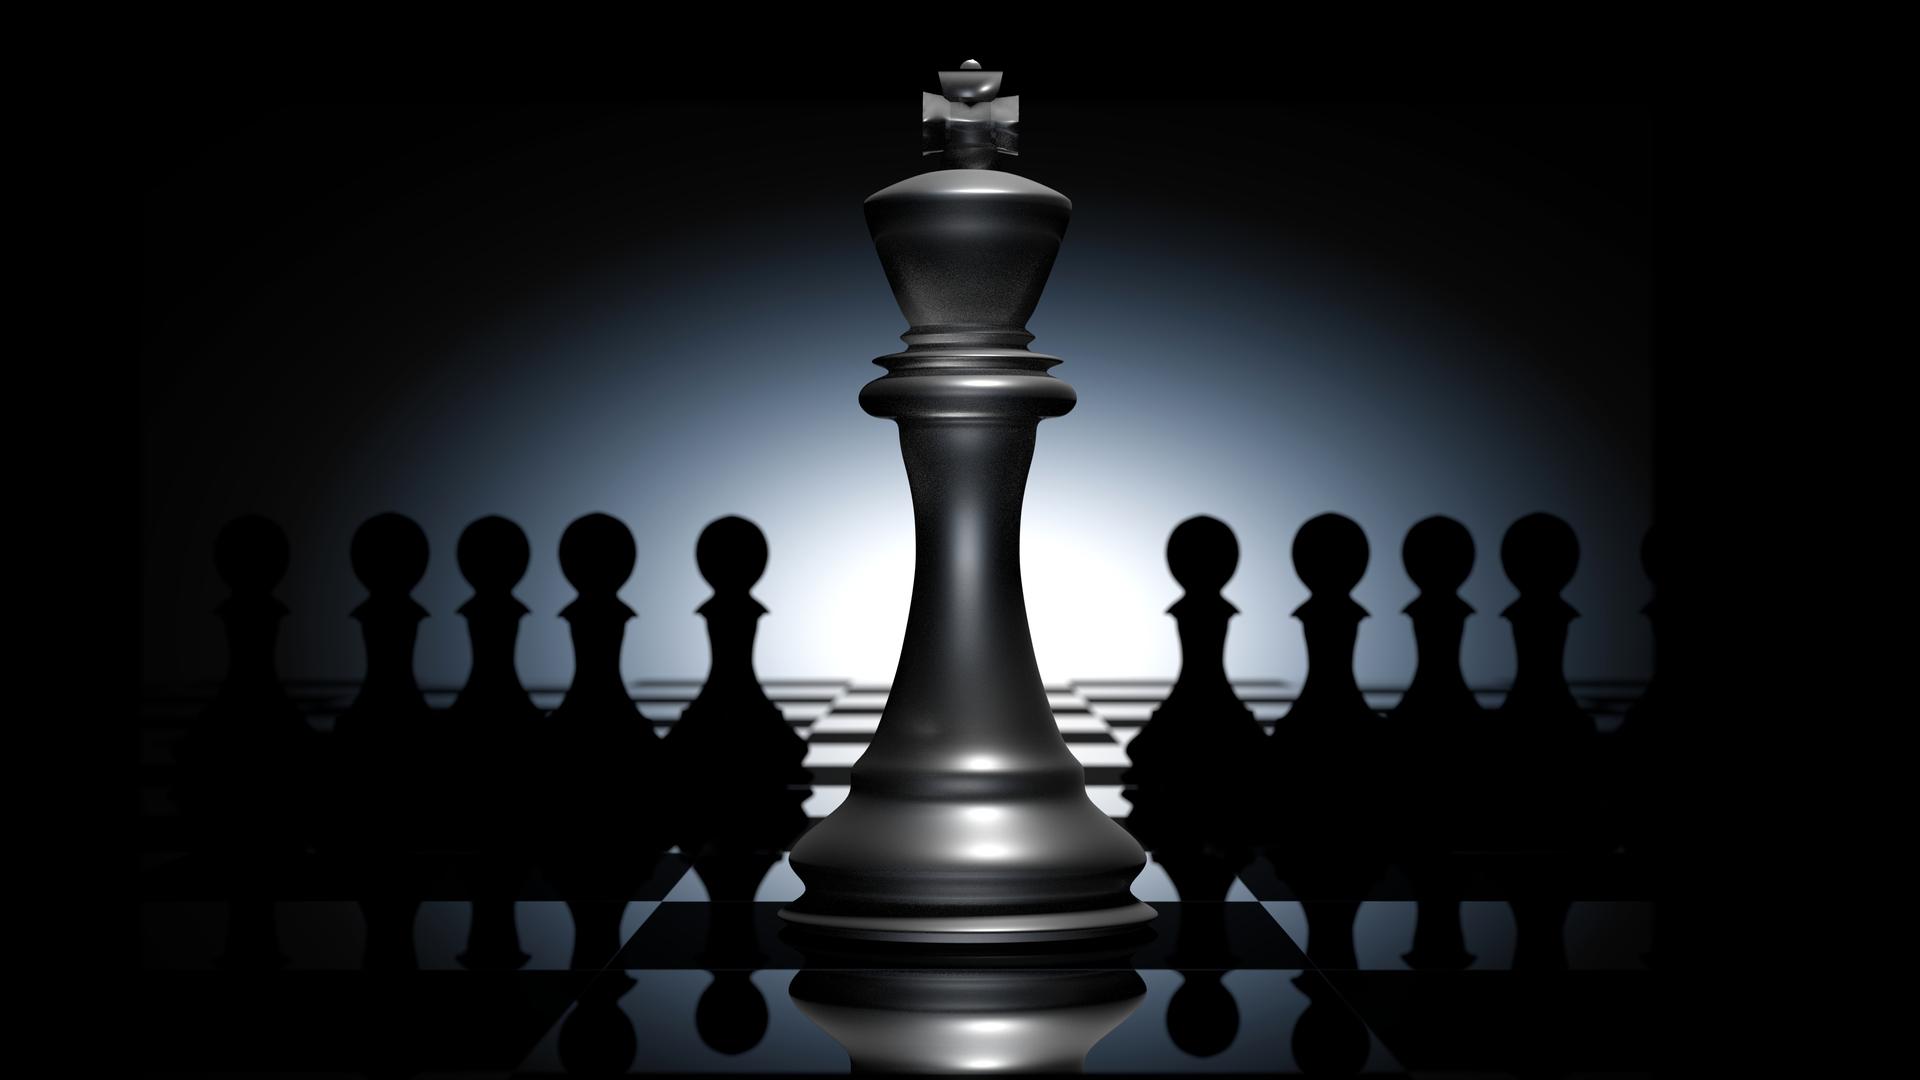 What Is Tempo in Chess?